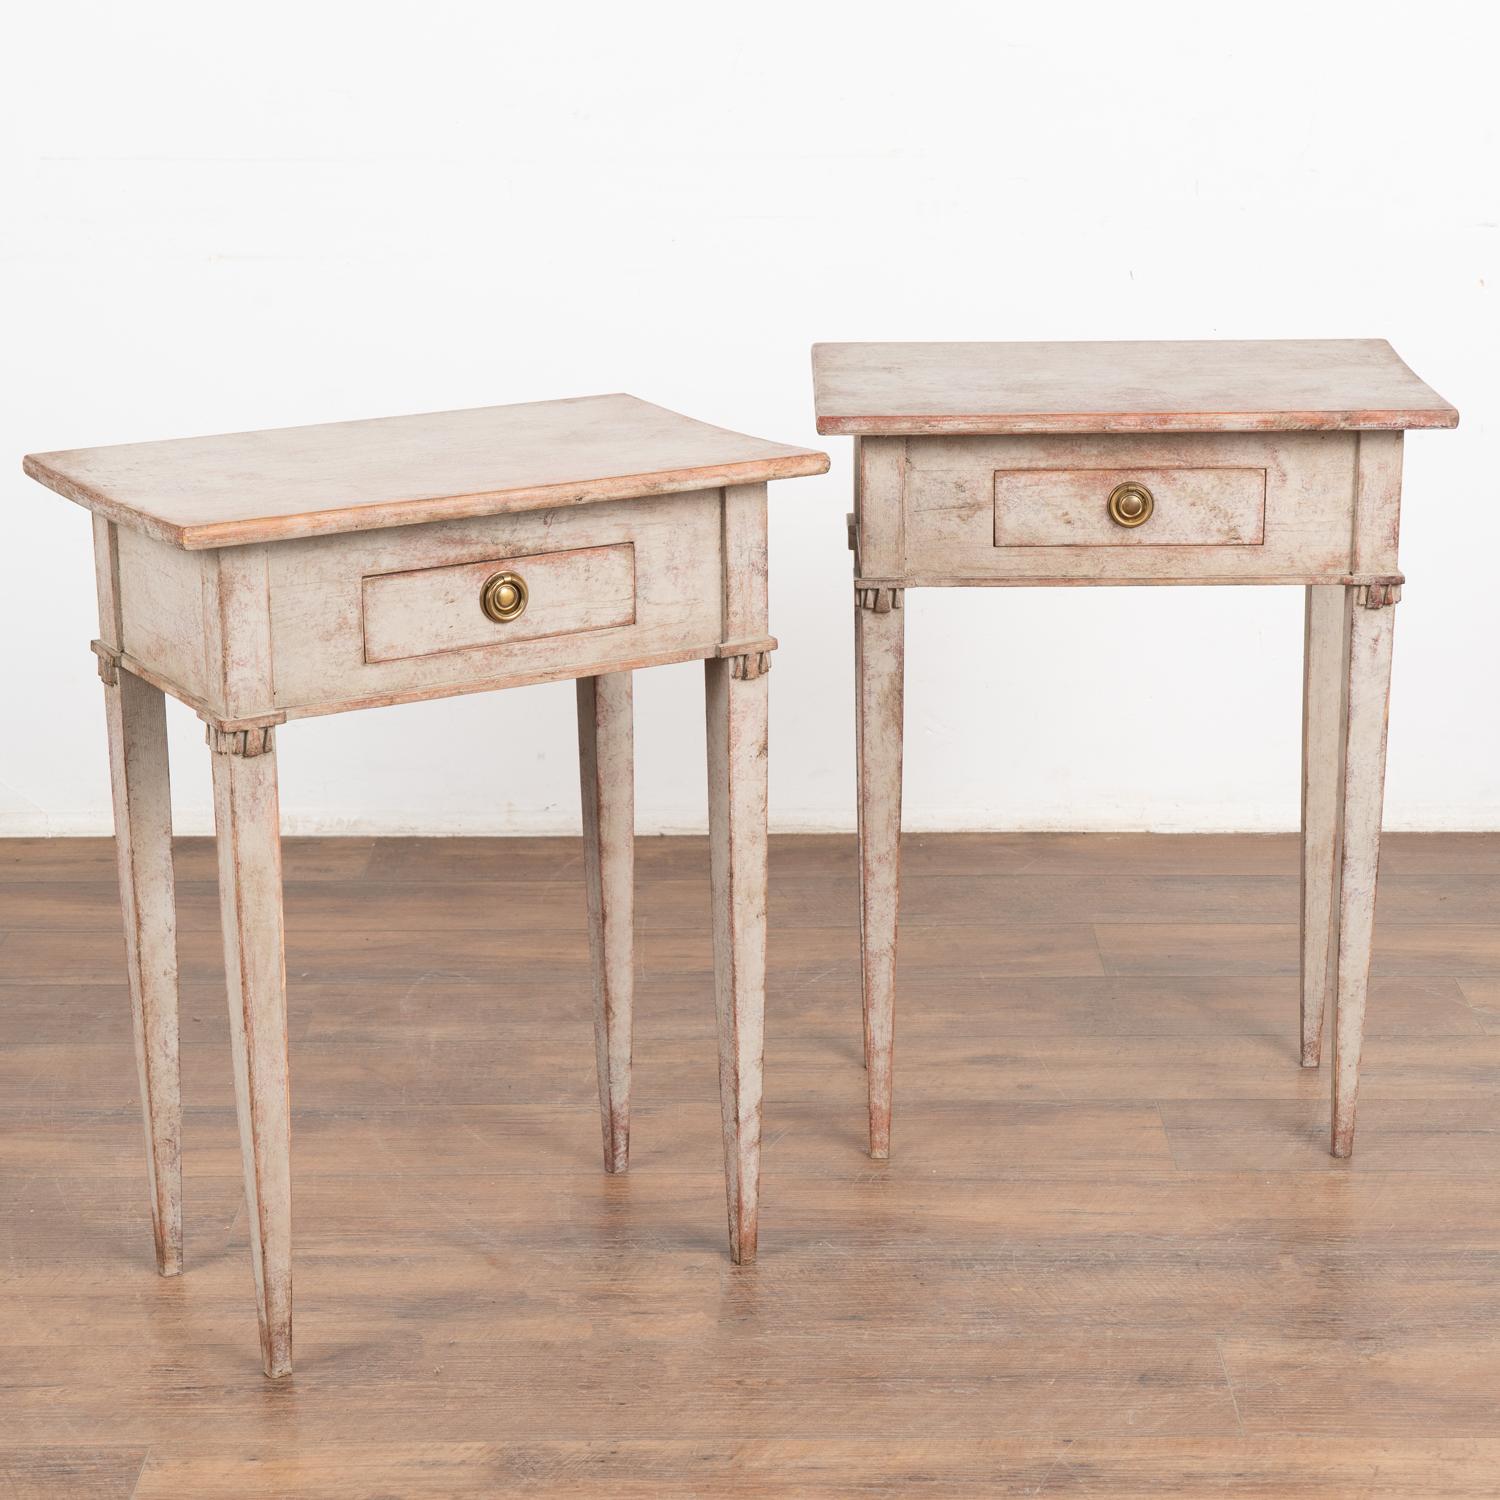 Pair, Swedish Gustavian style side tables with single petite drawer resting on graceful long tapered legs.
Restored, later professionally painted in layered/mottled shades of soft gray with plum and white undertones all lightly distressed to fit the